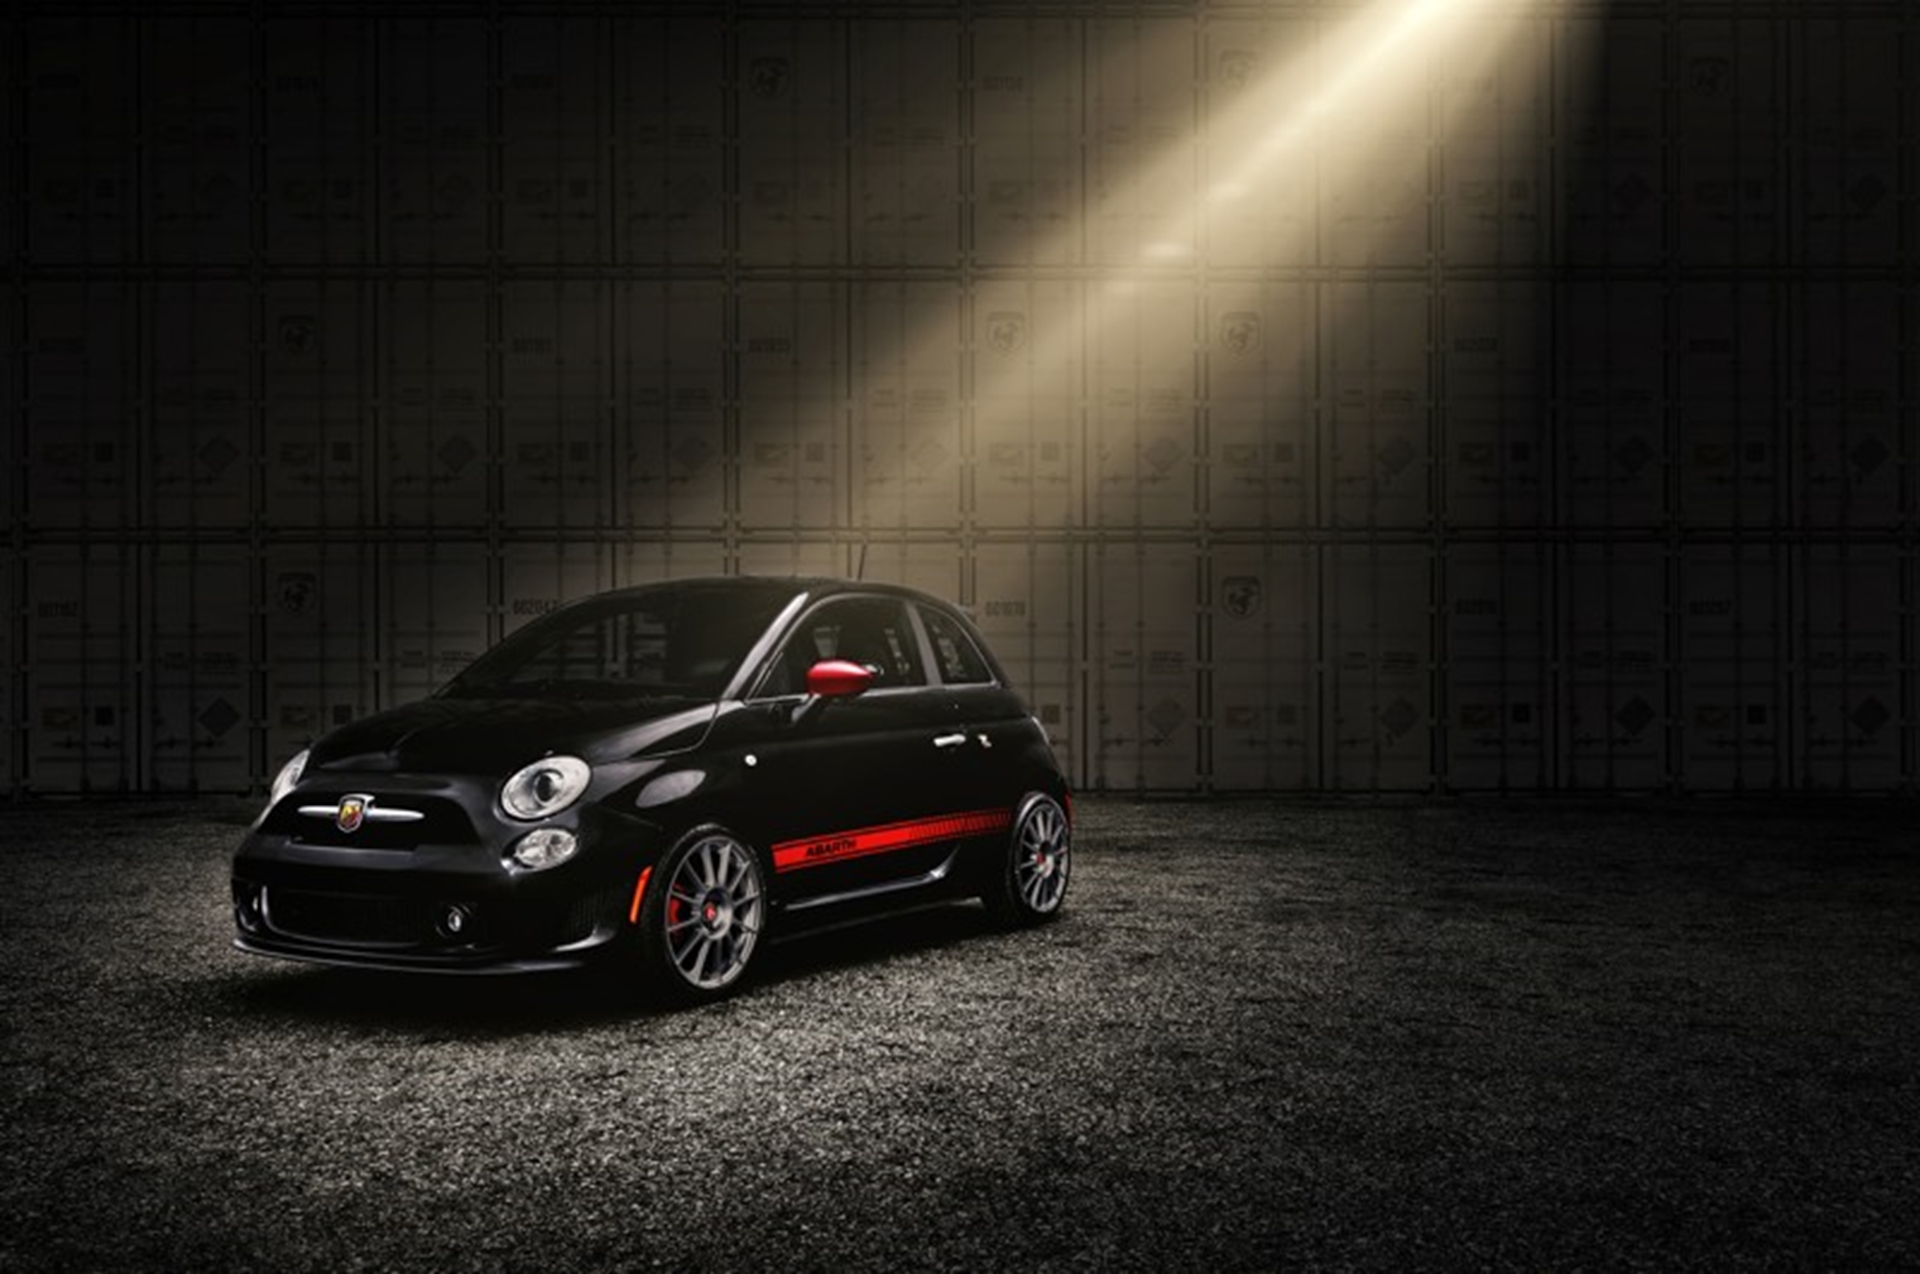 Montreal Auto Show Chrysler Canada: 2012 Fiat 500 Abarth Technology